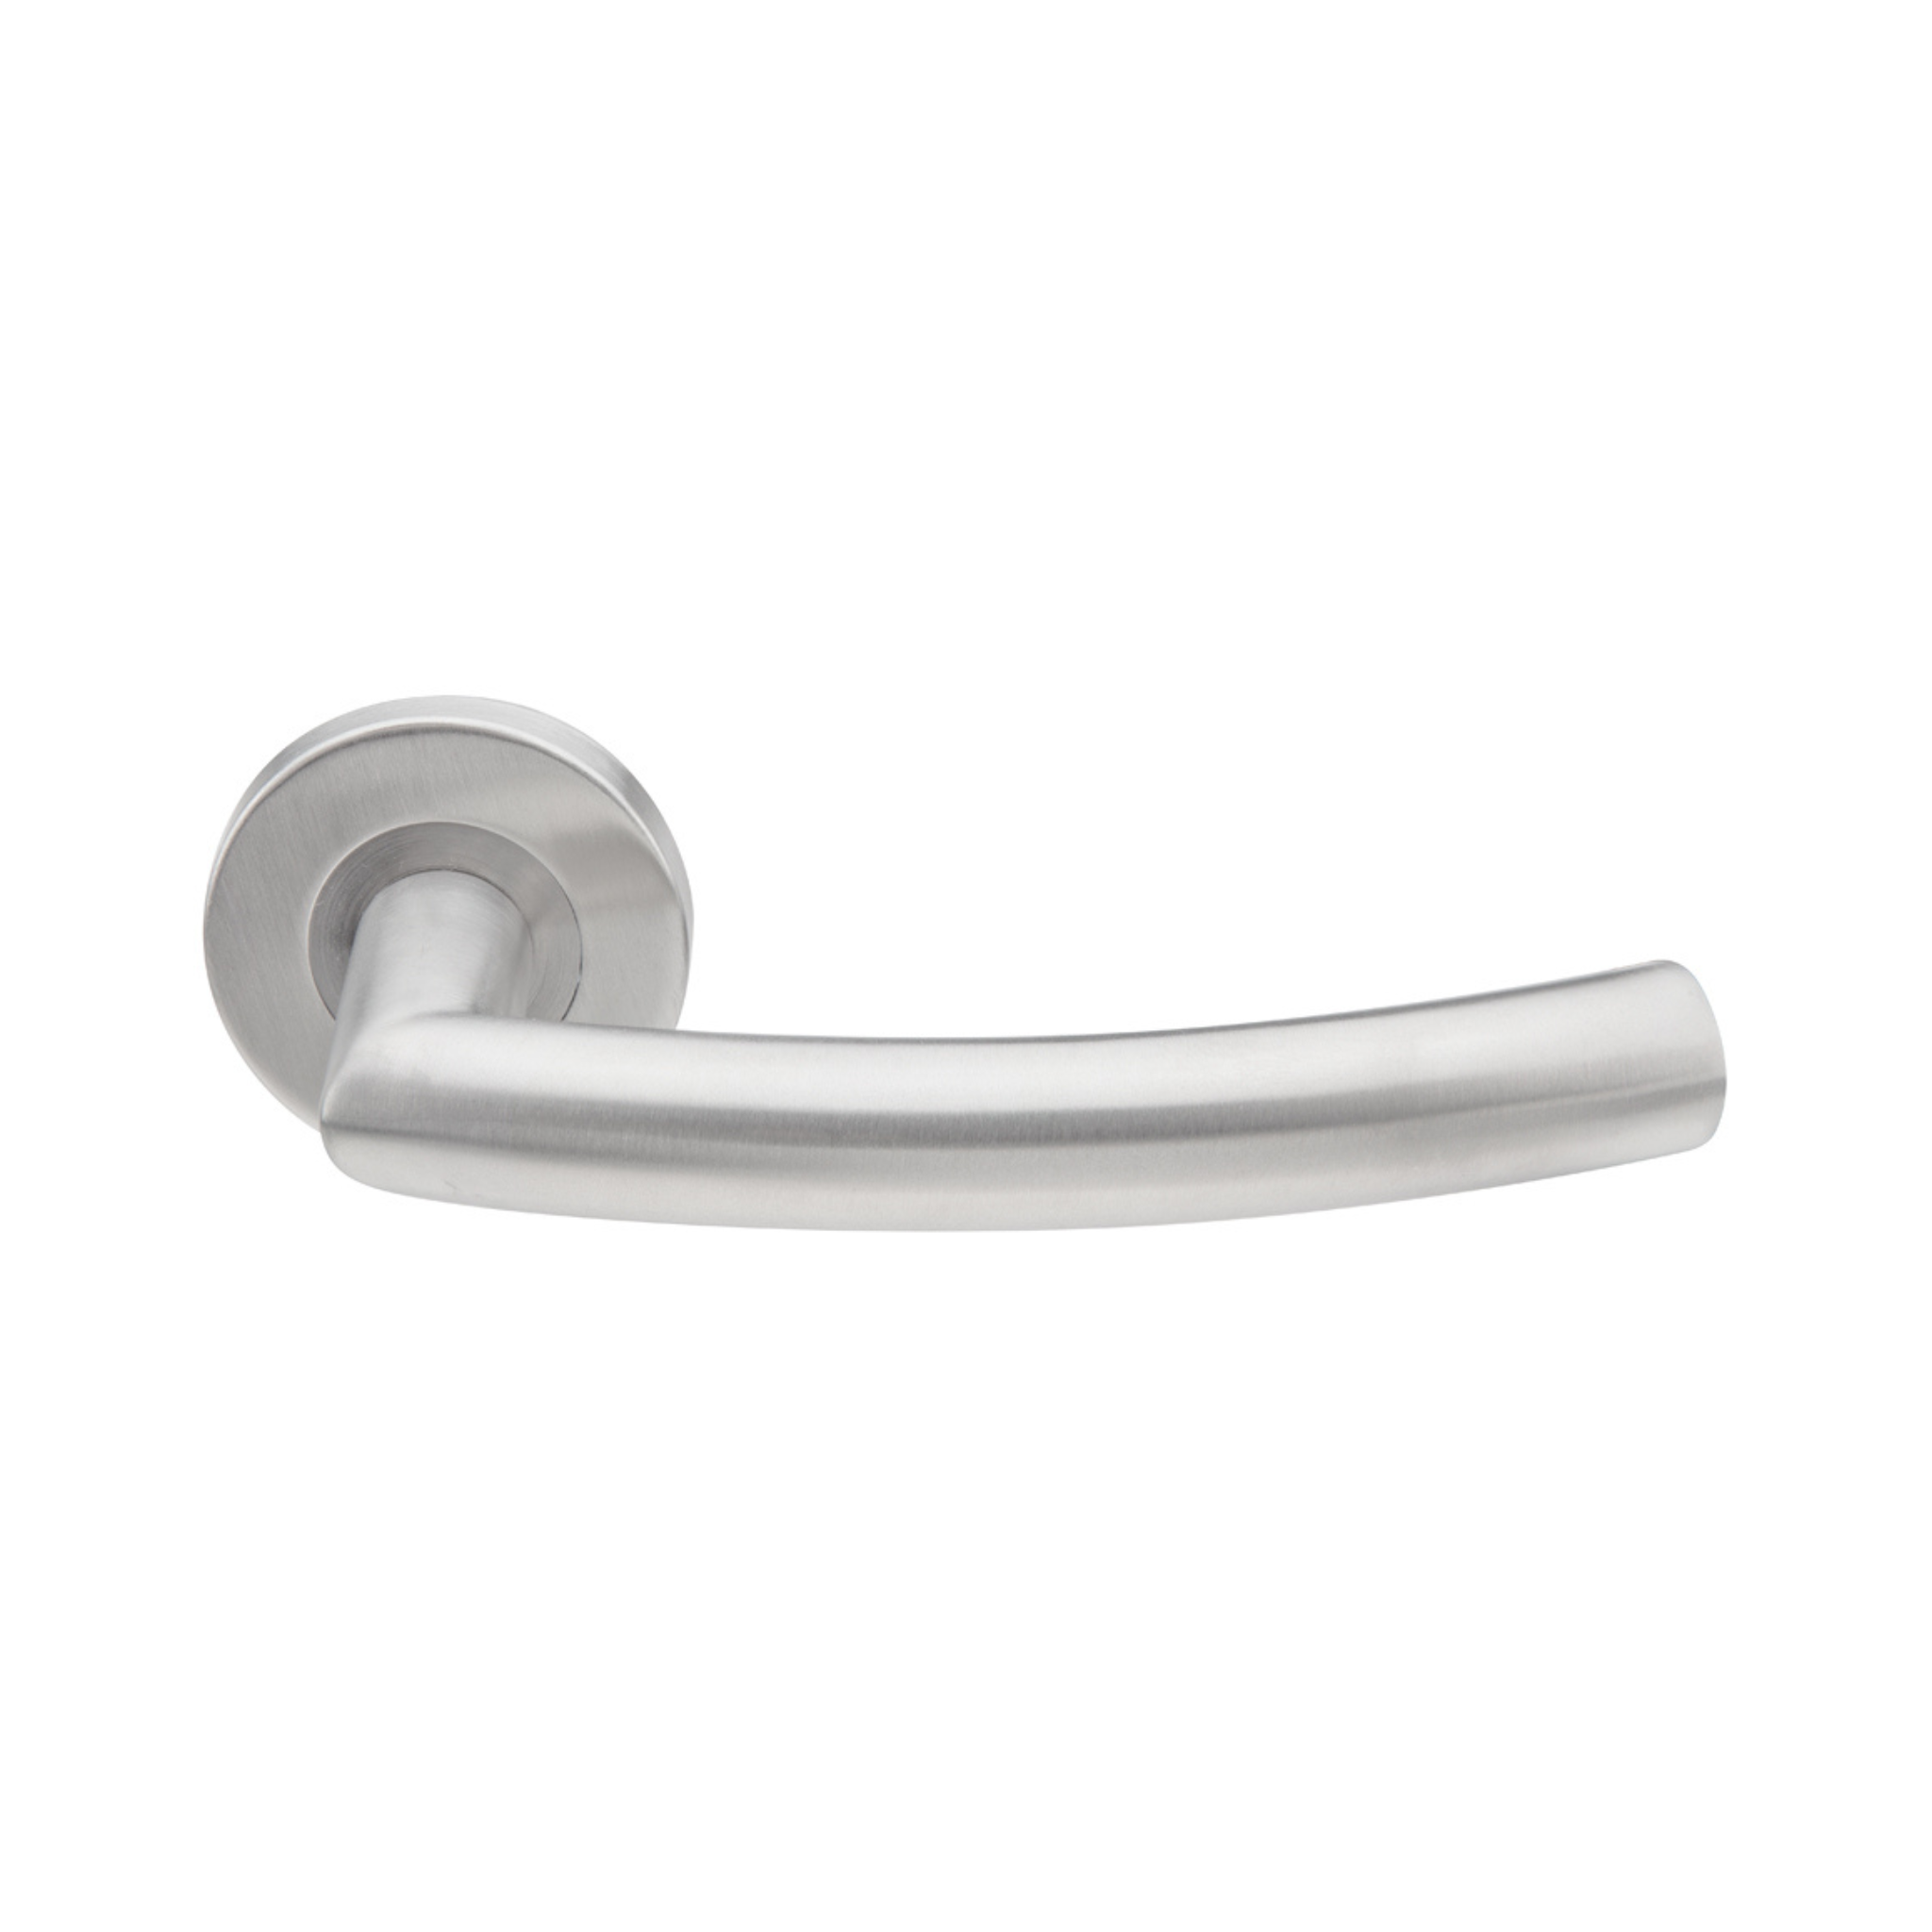 TH 128, Lever Handles, Tubular, On Round Rose, With Escutcheons, 152mm (l), Stainless Steel, DORMAKABA